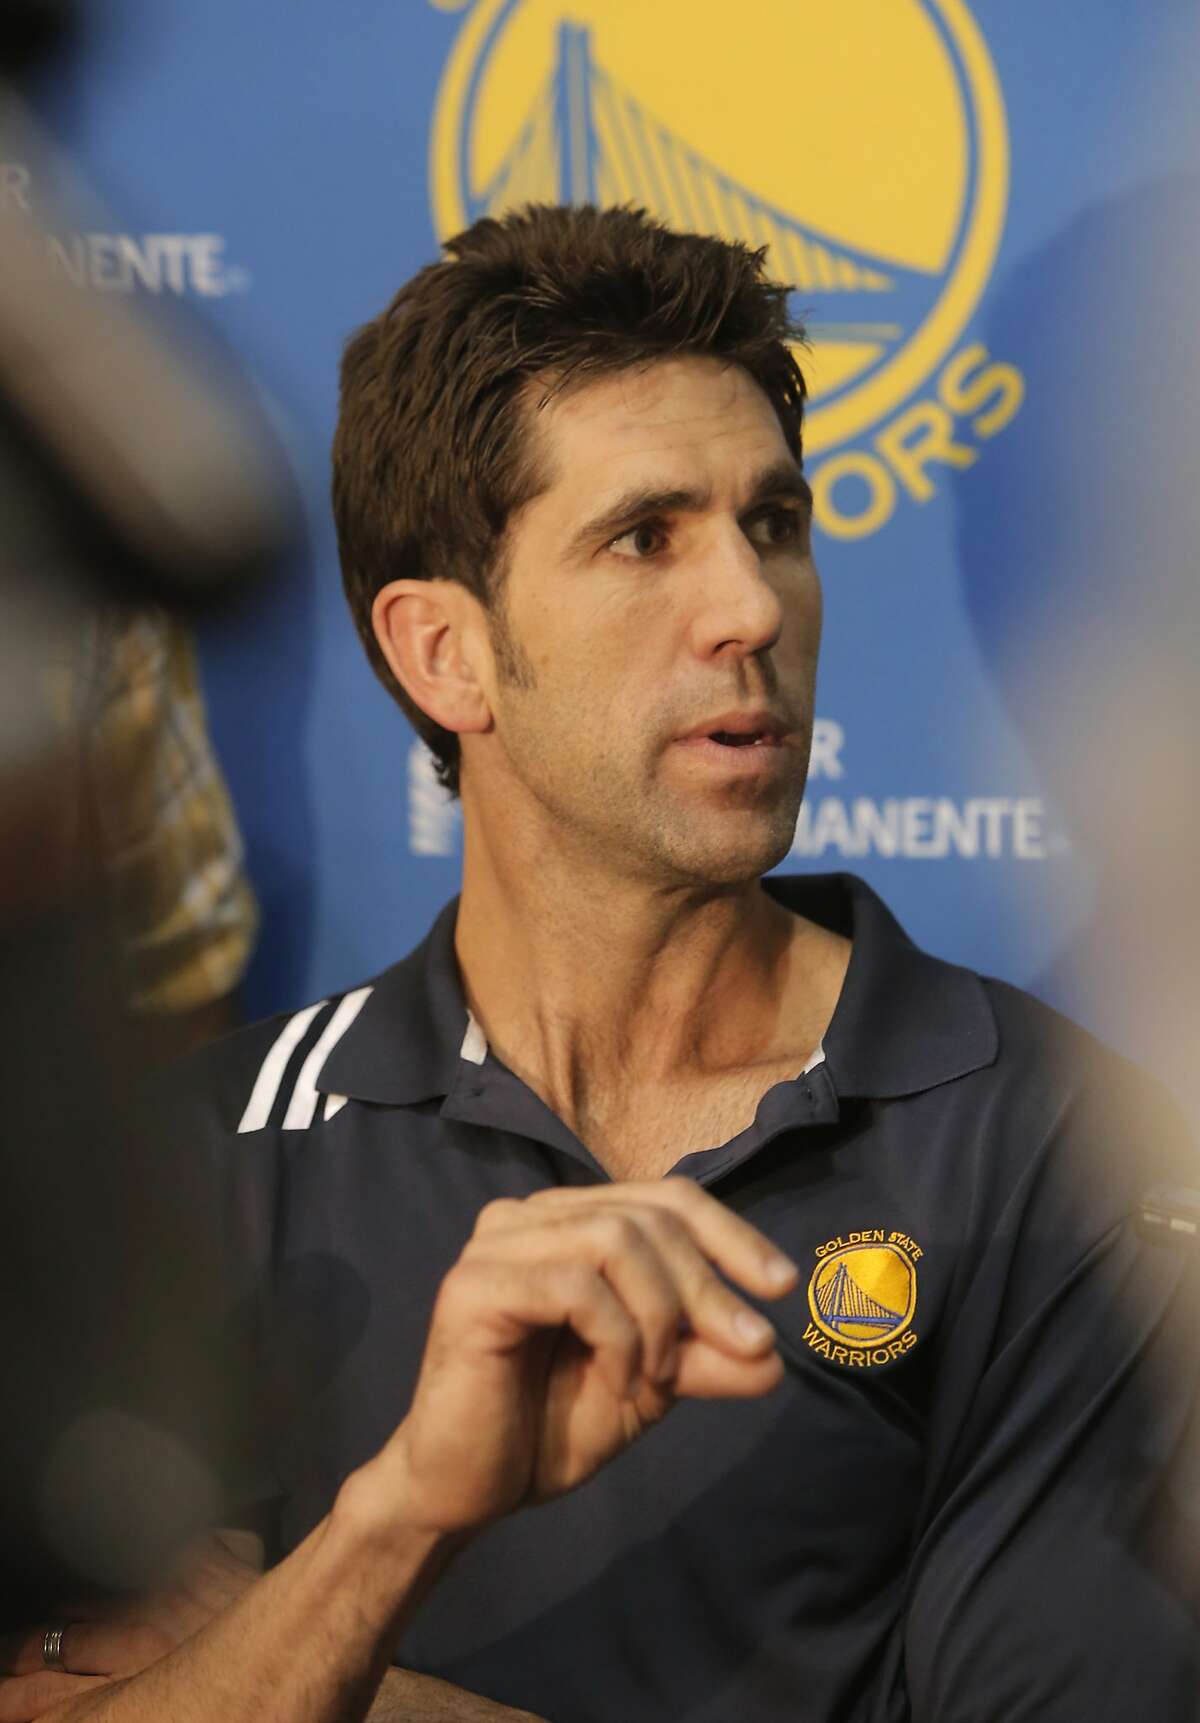 Golden State Warriors' general manager Bob Myers speaks to the media during the final press conference of the season at their practice facility in Oakland, Calif. on Thurs. June 18, 2015.